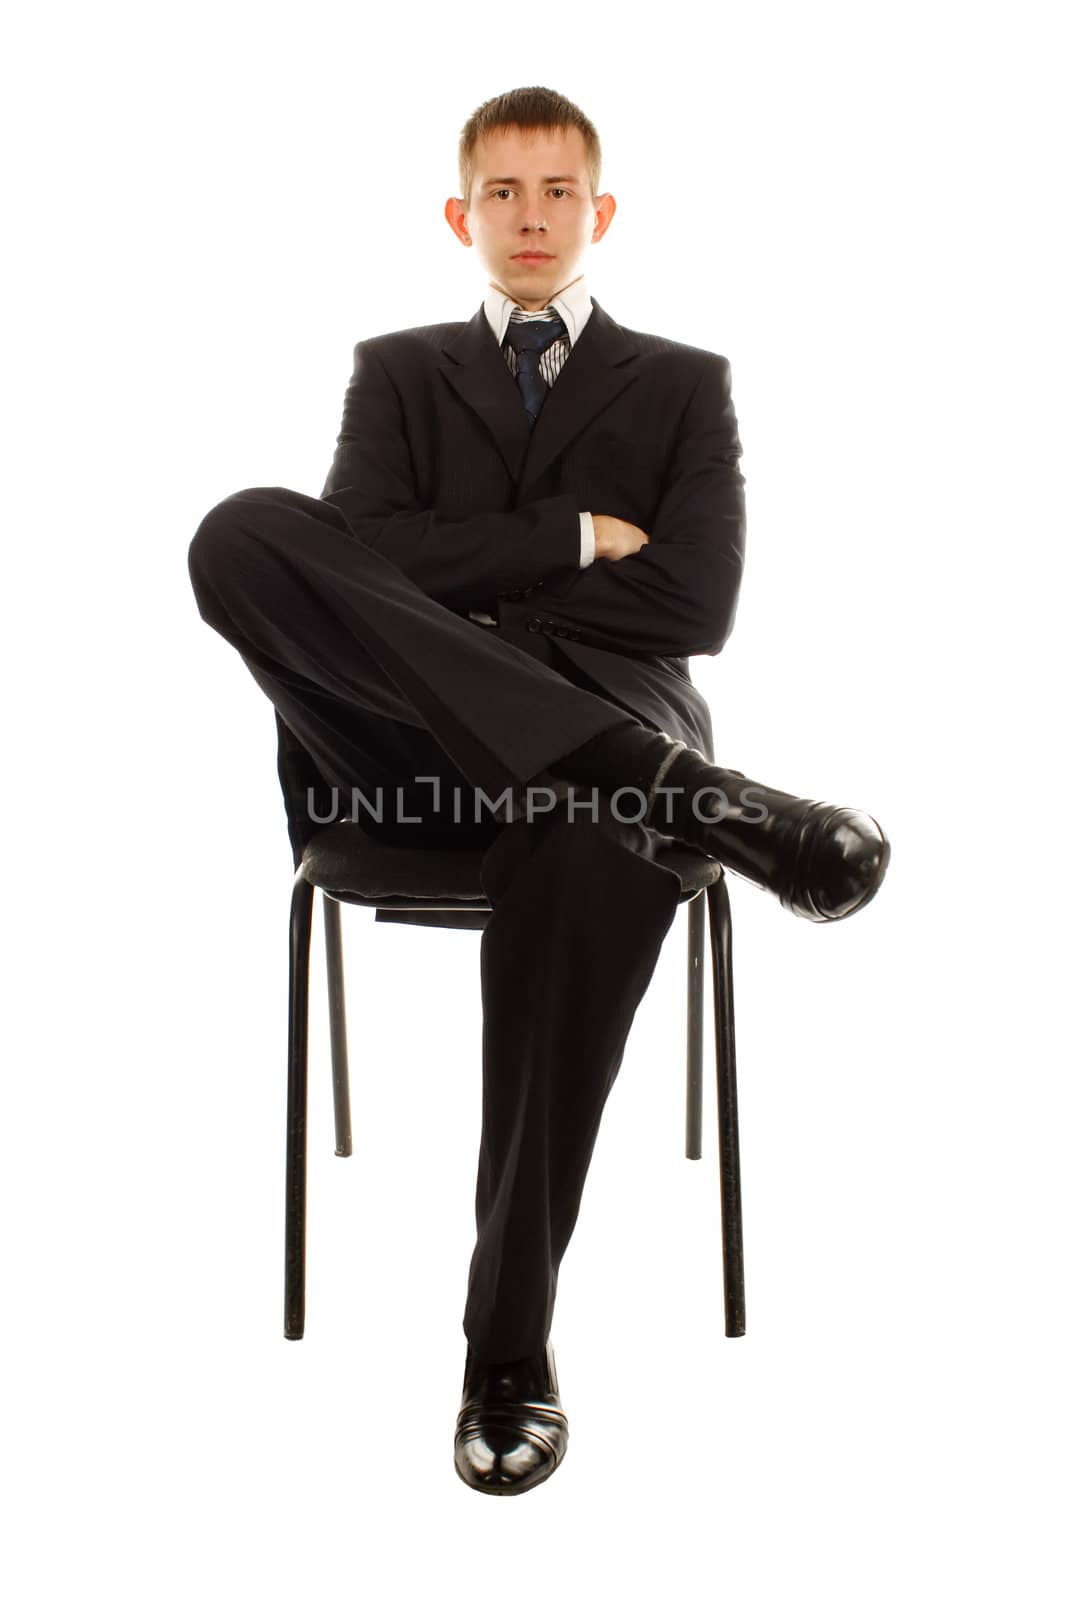 The businessman on the chair isolated on white background.